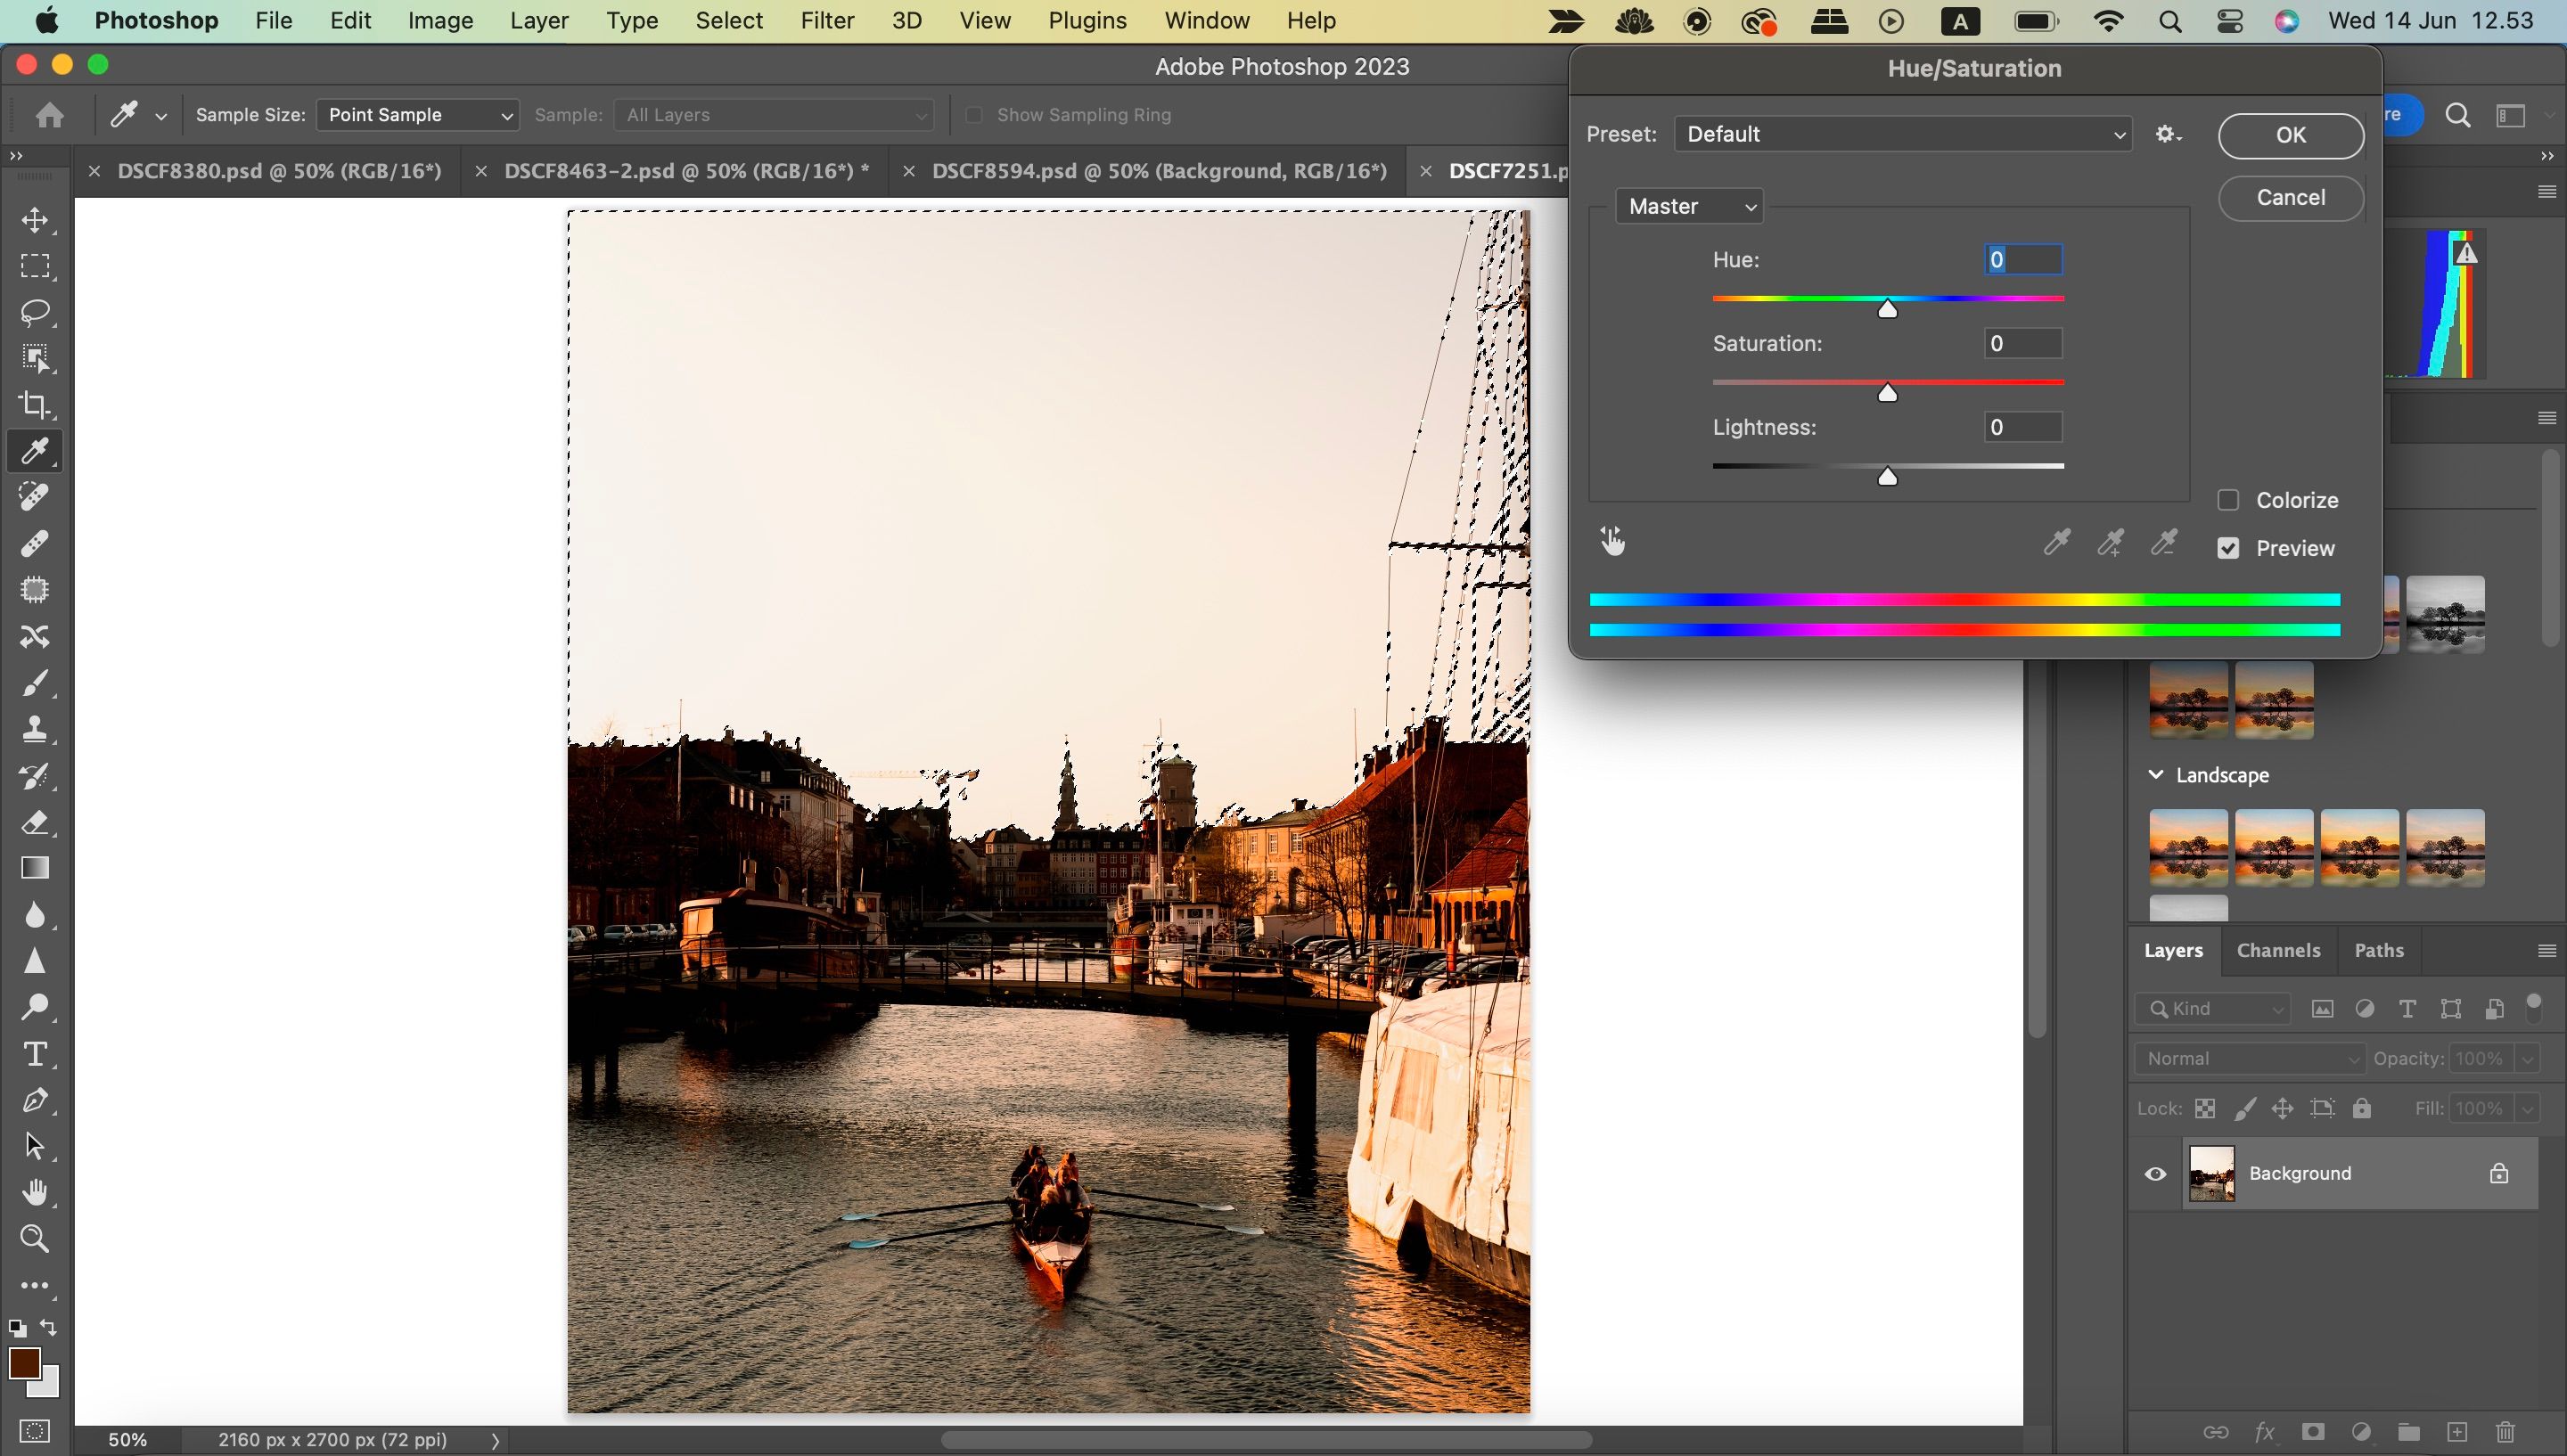 Sliders for Hue and Saturation in Photoshop, Plus Lightness